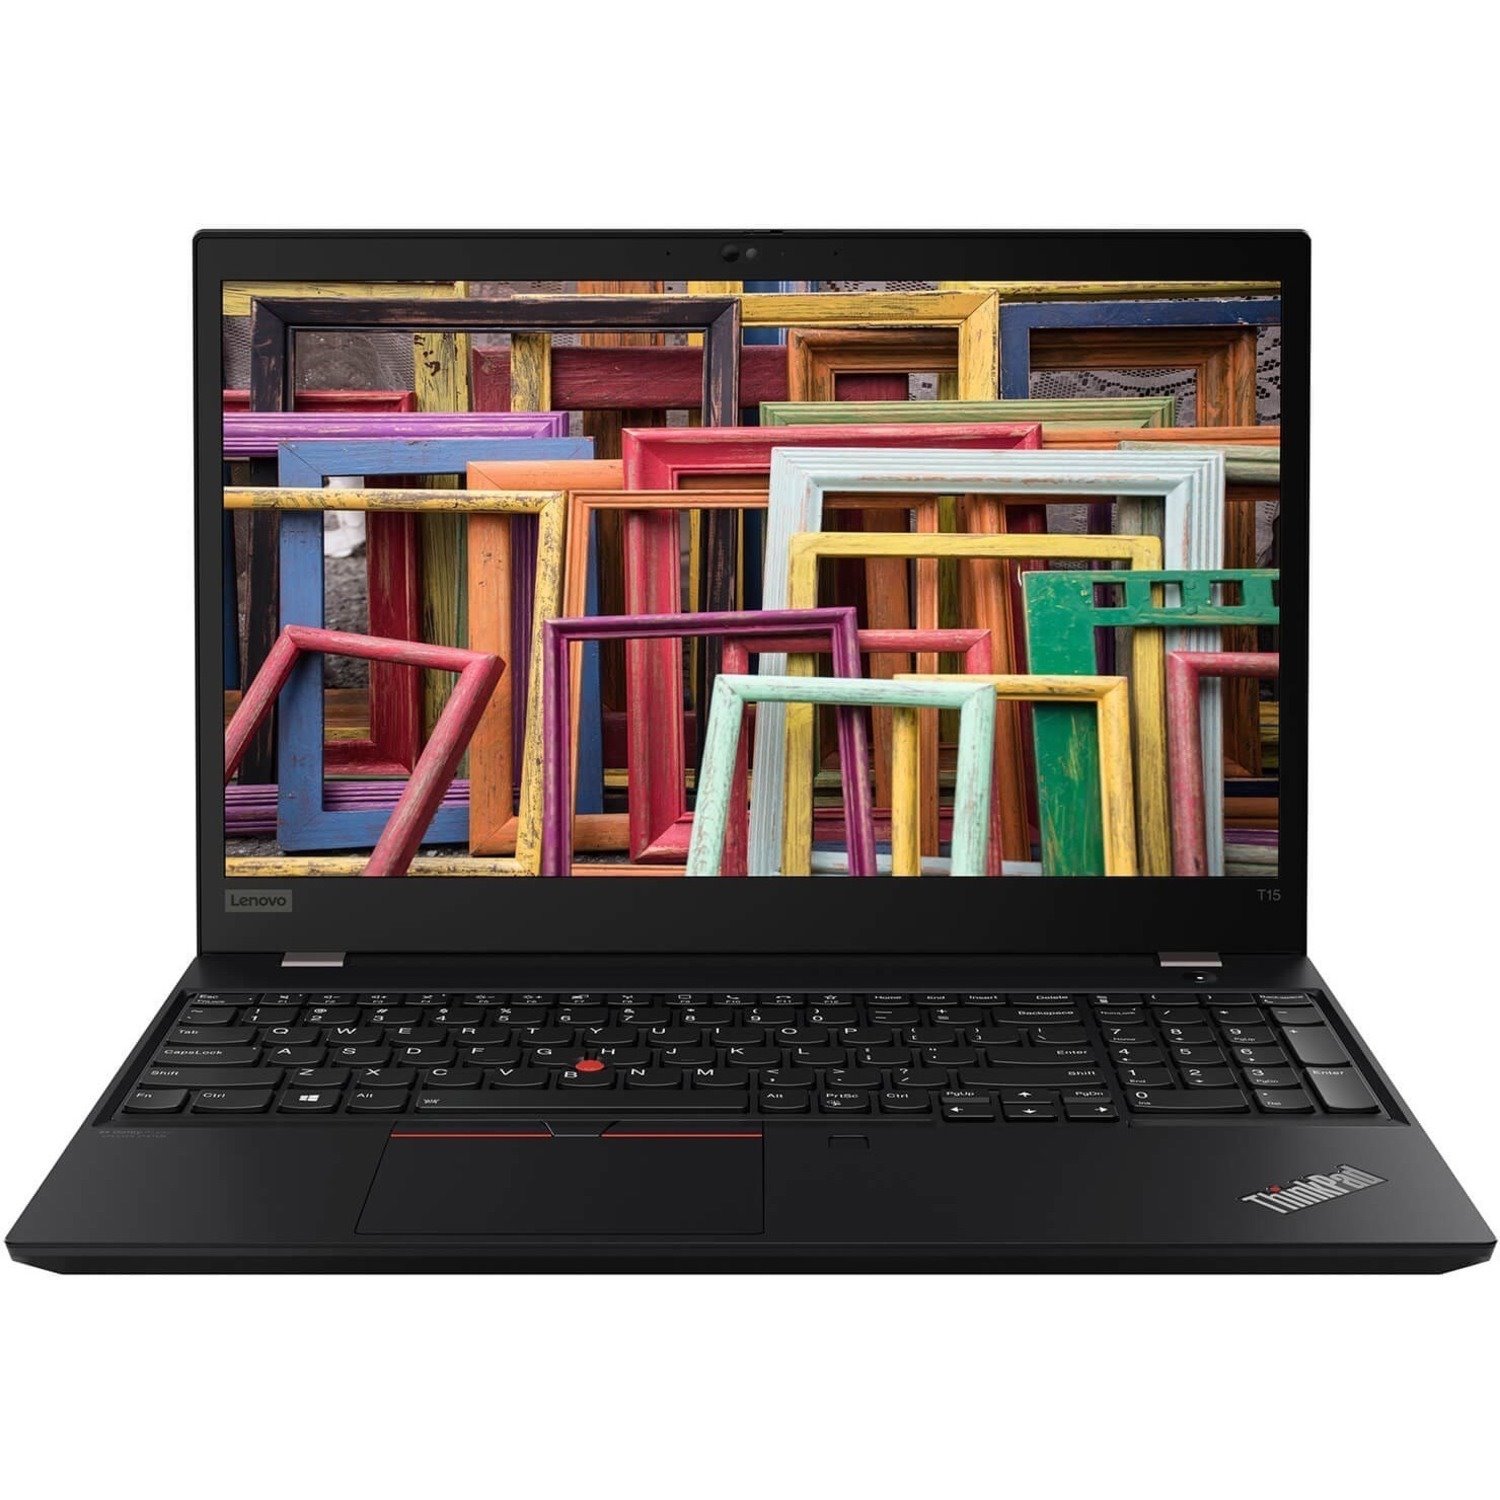 Lenovo ThinkPad T15 Gen 2 20W400K6US 15.6" Notebook - Full HD - 1920 x 1080 - Intel Core i5 11th Gen i5-1145G7 Quad-core (4 Core) 2.6GHz - 8GB Total RAM - 256GB SSD - no ethernet port - not compatible with mechanical docking stations